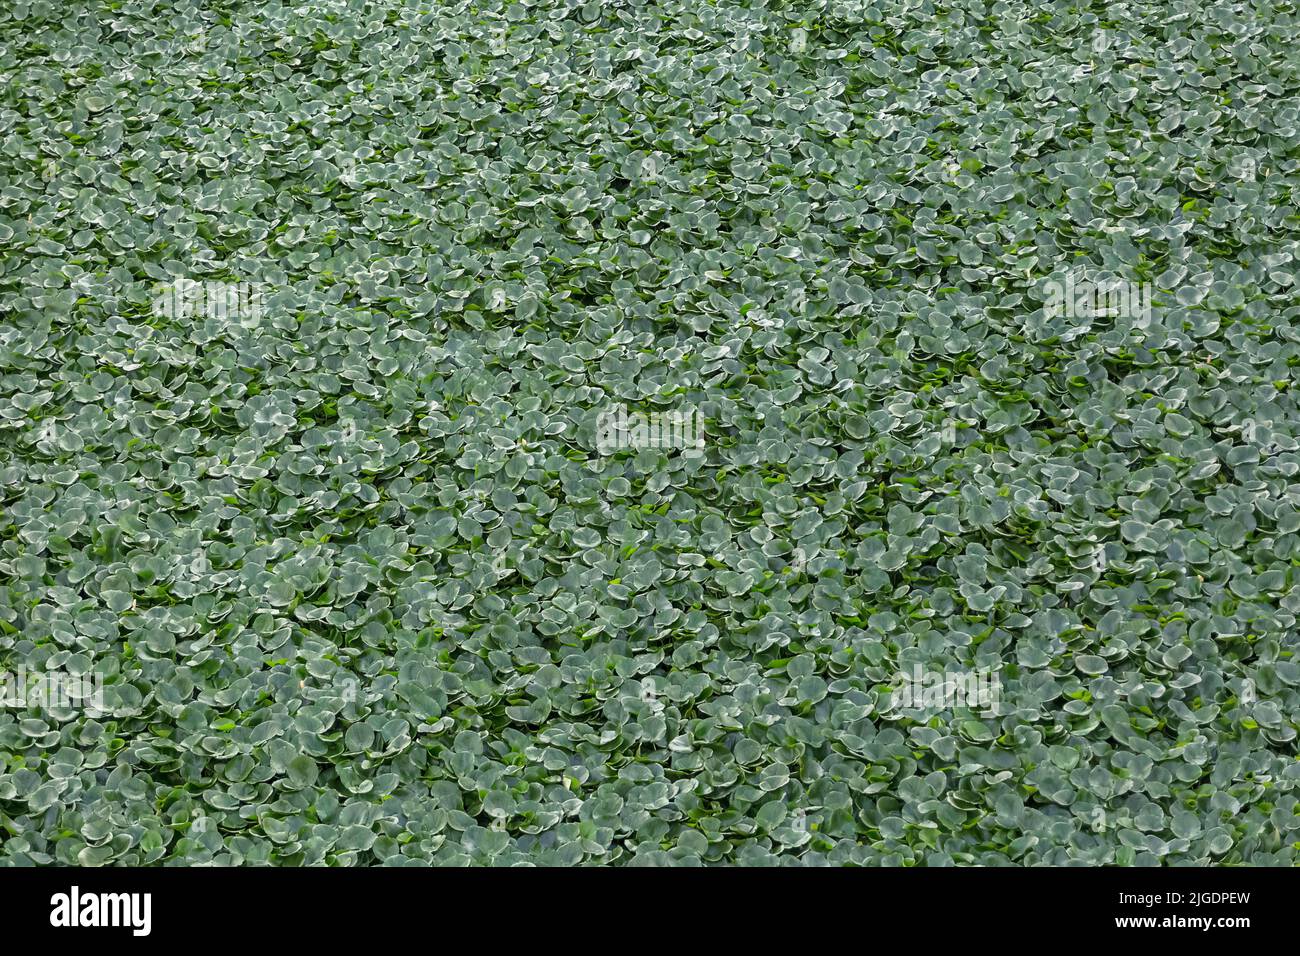 General view of water lilies, Camalotes, on the Guadiana river in Badajoz, Spain, presently recognized as a river pest, texture and background... Stock Photo